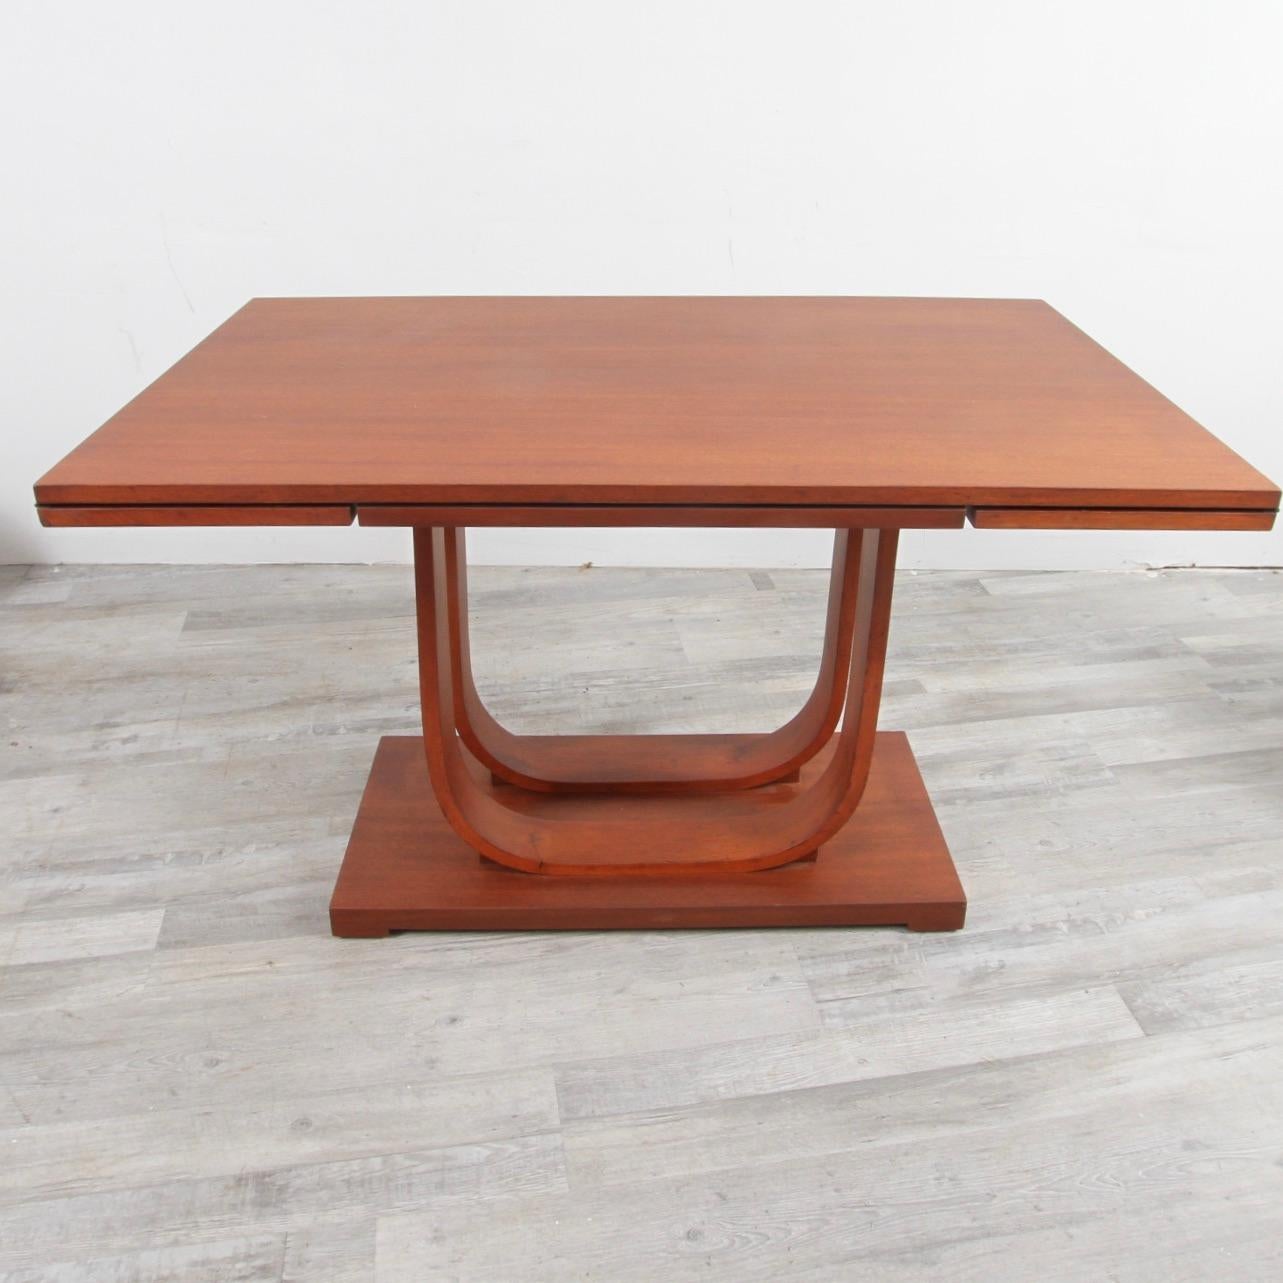 20th Century Art Deco Gilbert Rohde Heywood Wakefield Extension Dining Table For Sale